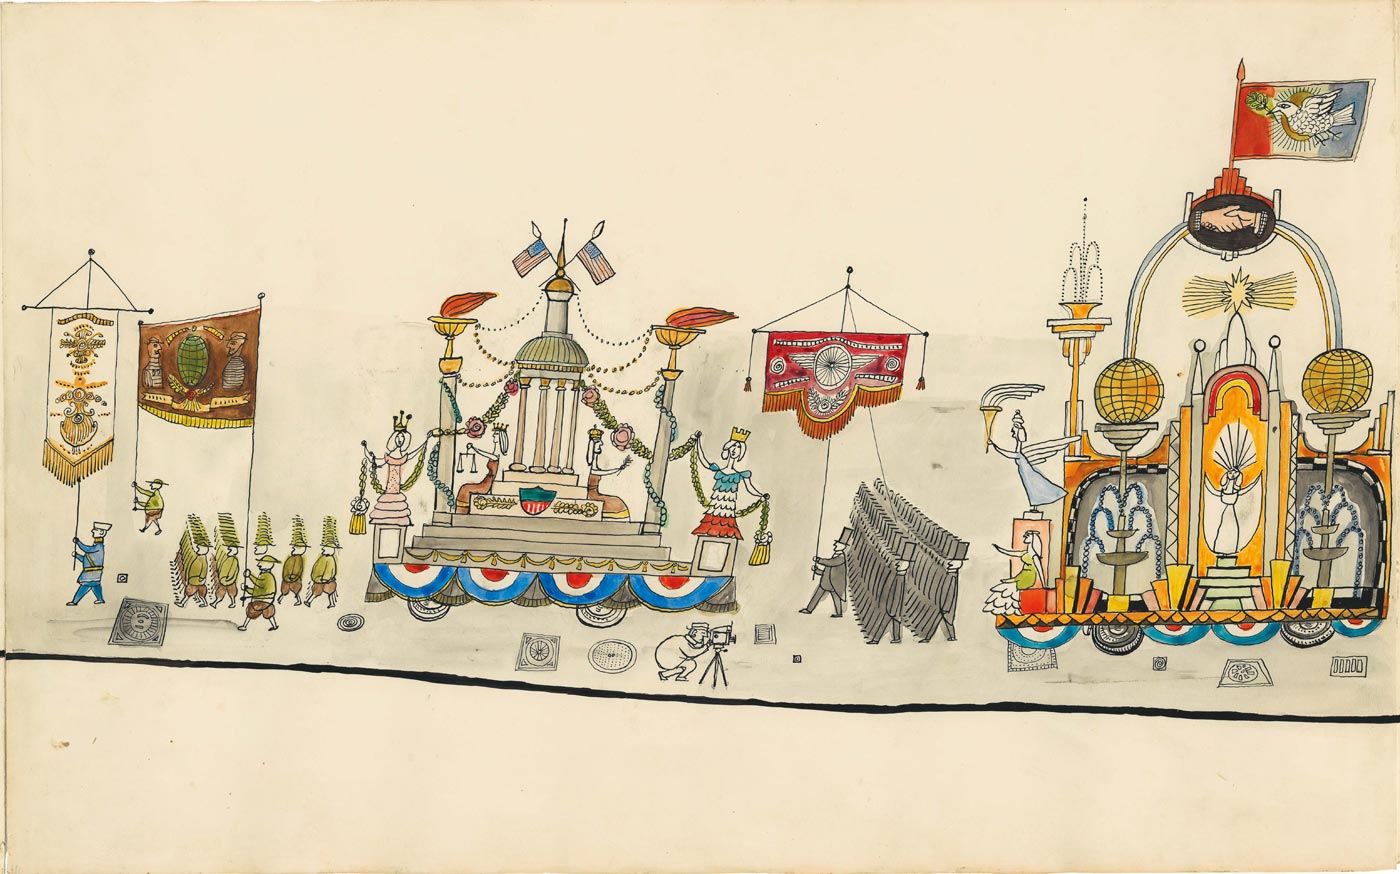 Three panels from Parade, 1950. Ink, wash, crayon, gold paper on paper, 14 9/16 x 23 1/16 each. The Metrpolitan Museum of Art, New York; Purchase, Elihu Root, Jr. Gift and Rogers Fund.